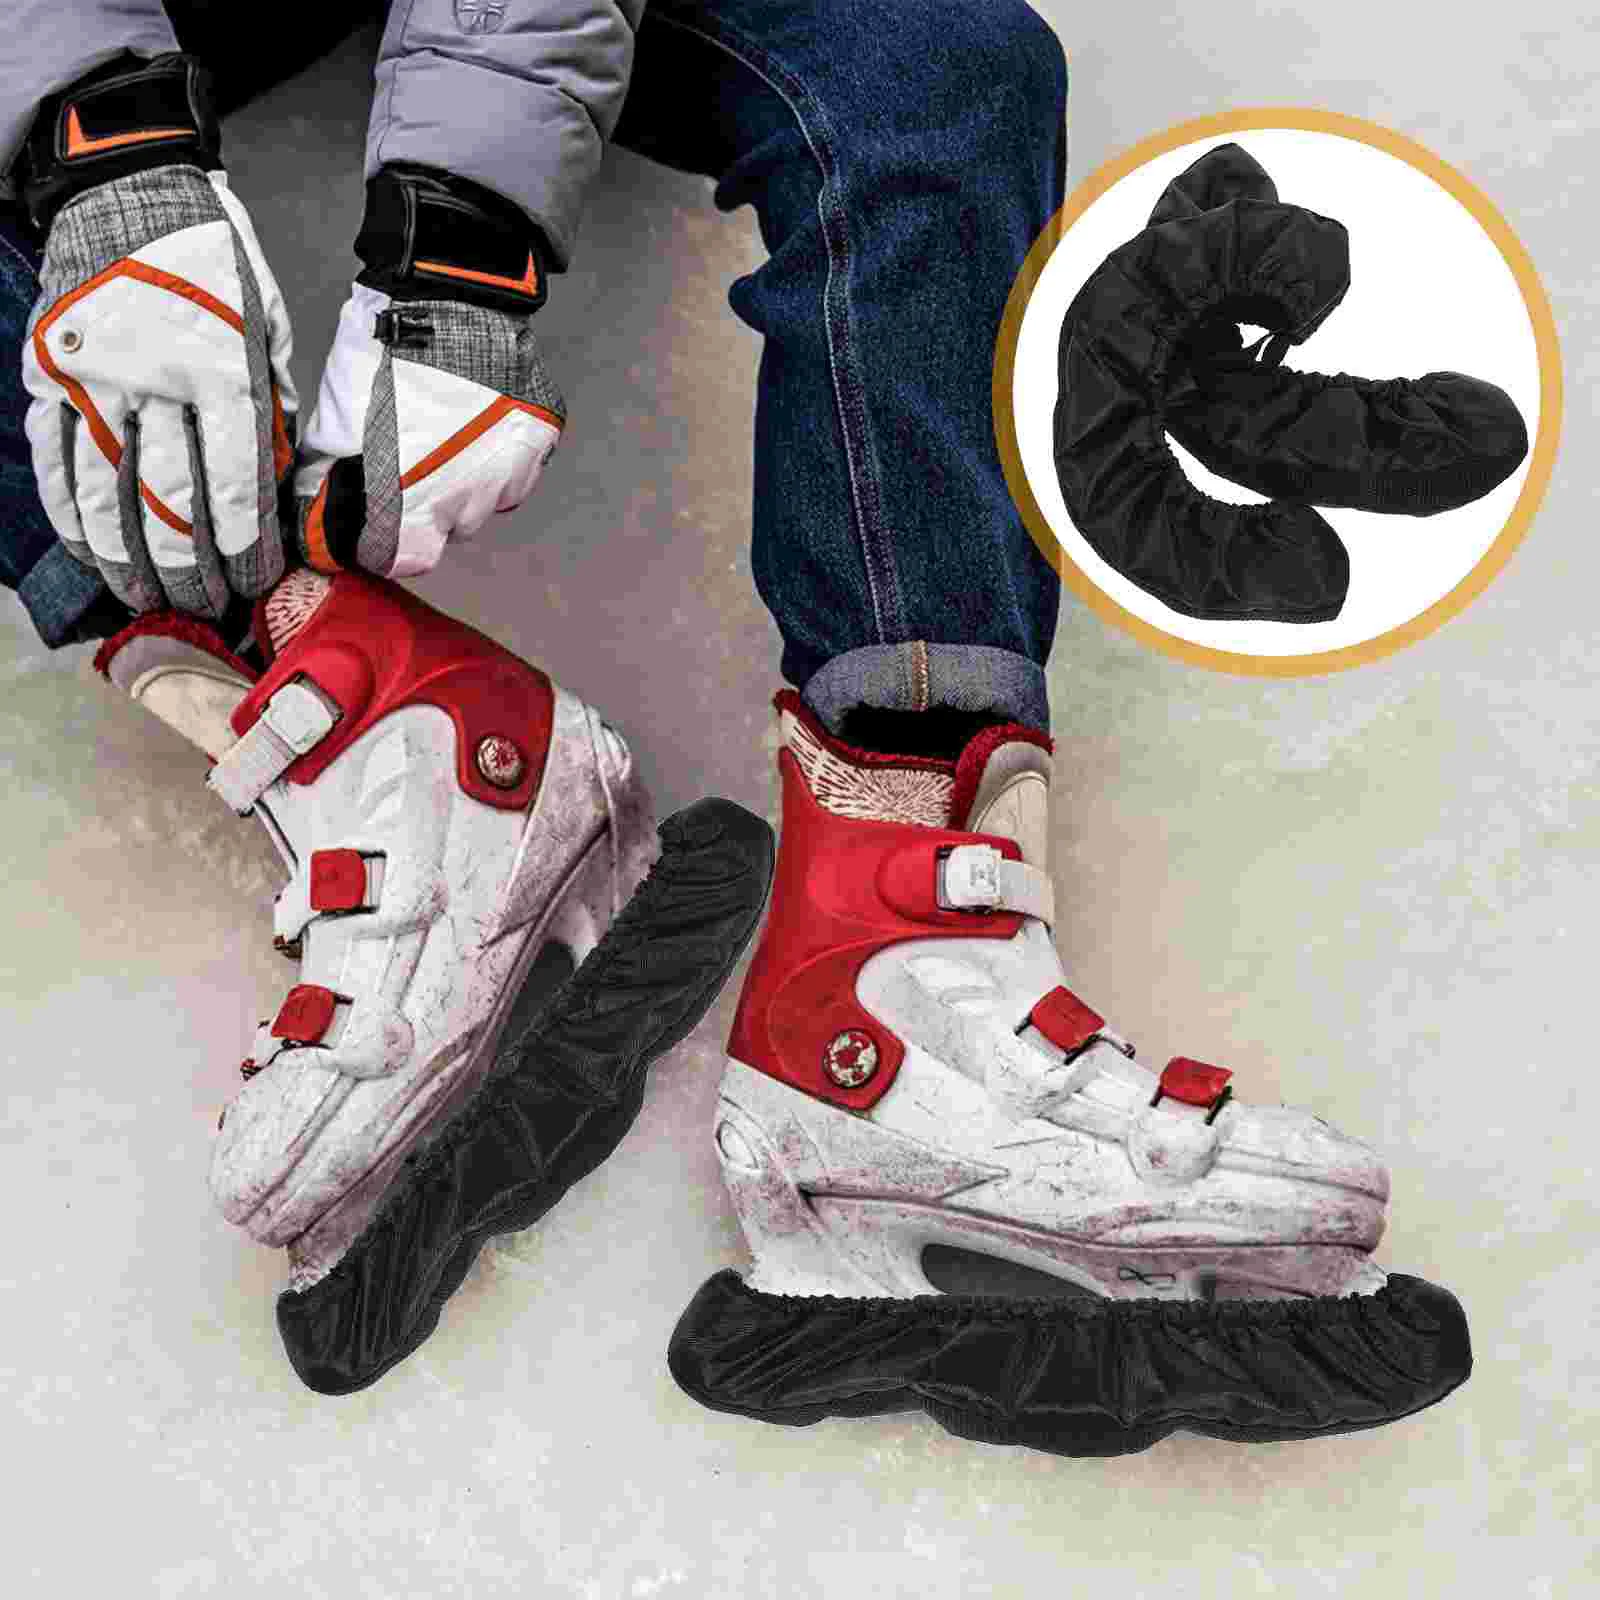 Skate Boots Skates Ice Skating Shoes Covers Protective Case Portable Blade Guard